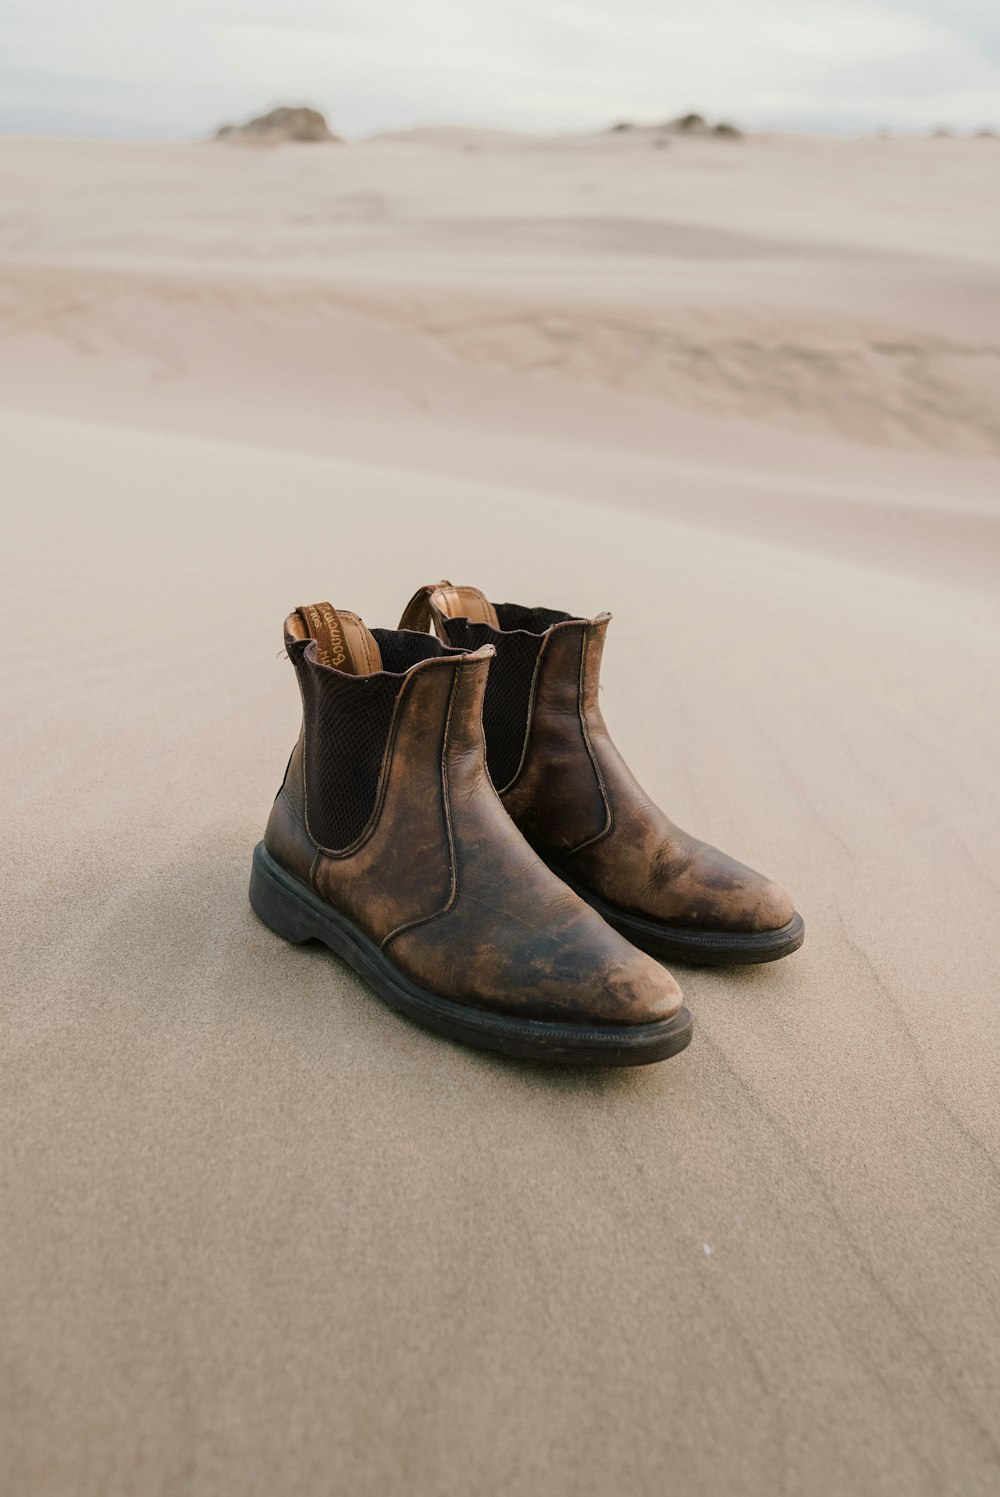 a pair of brown boots sitting on top of a sandy beach